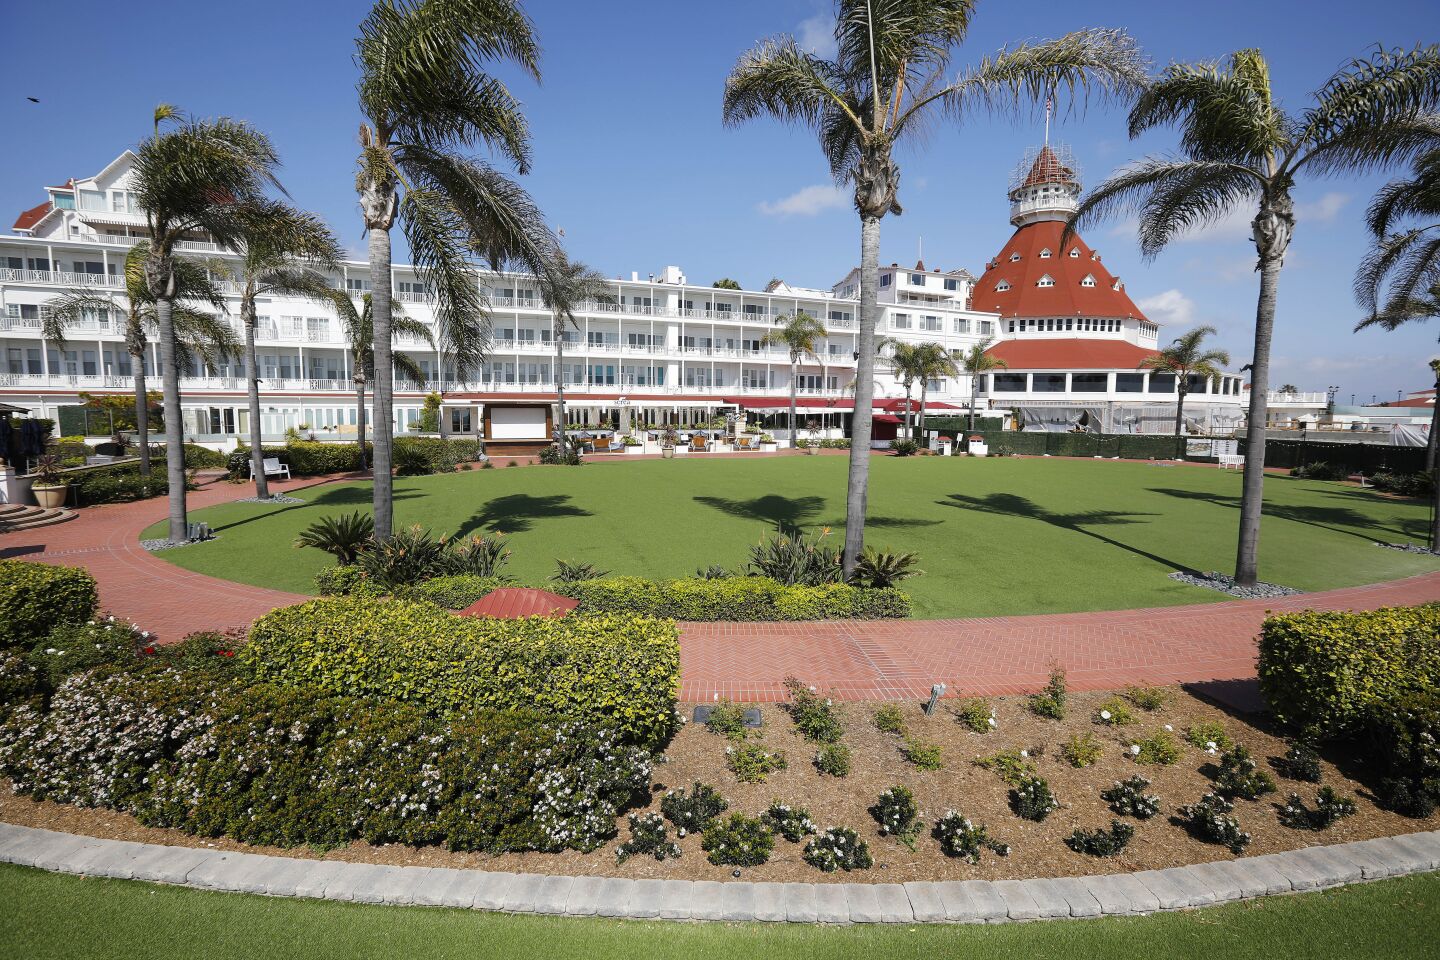 The Hotel del Coronado has temporarily suspended operations for the first time in its 132 year history, shown here on March 29, 2020.